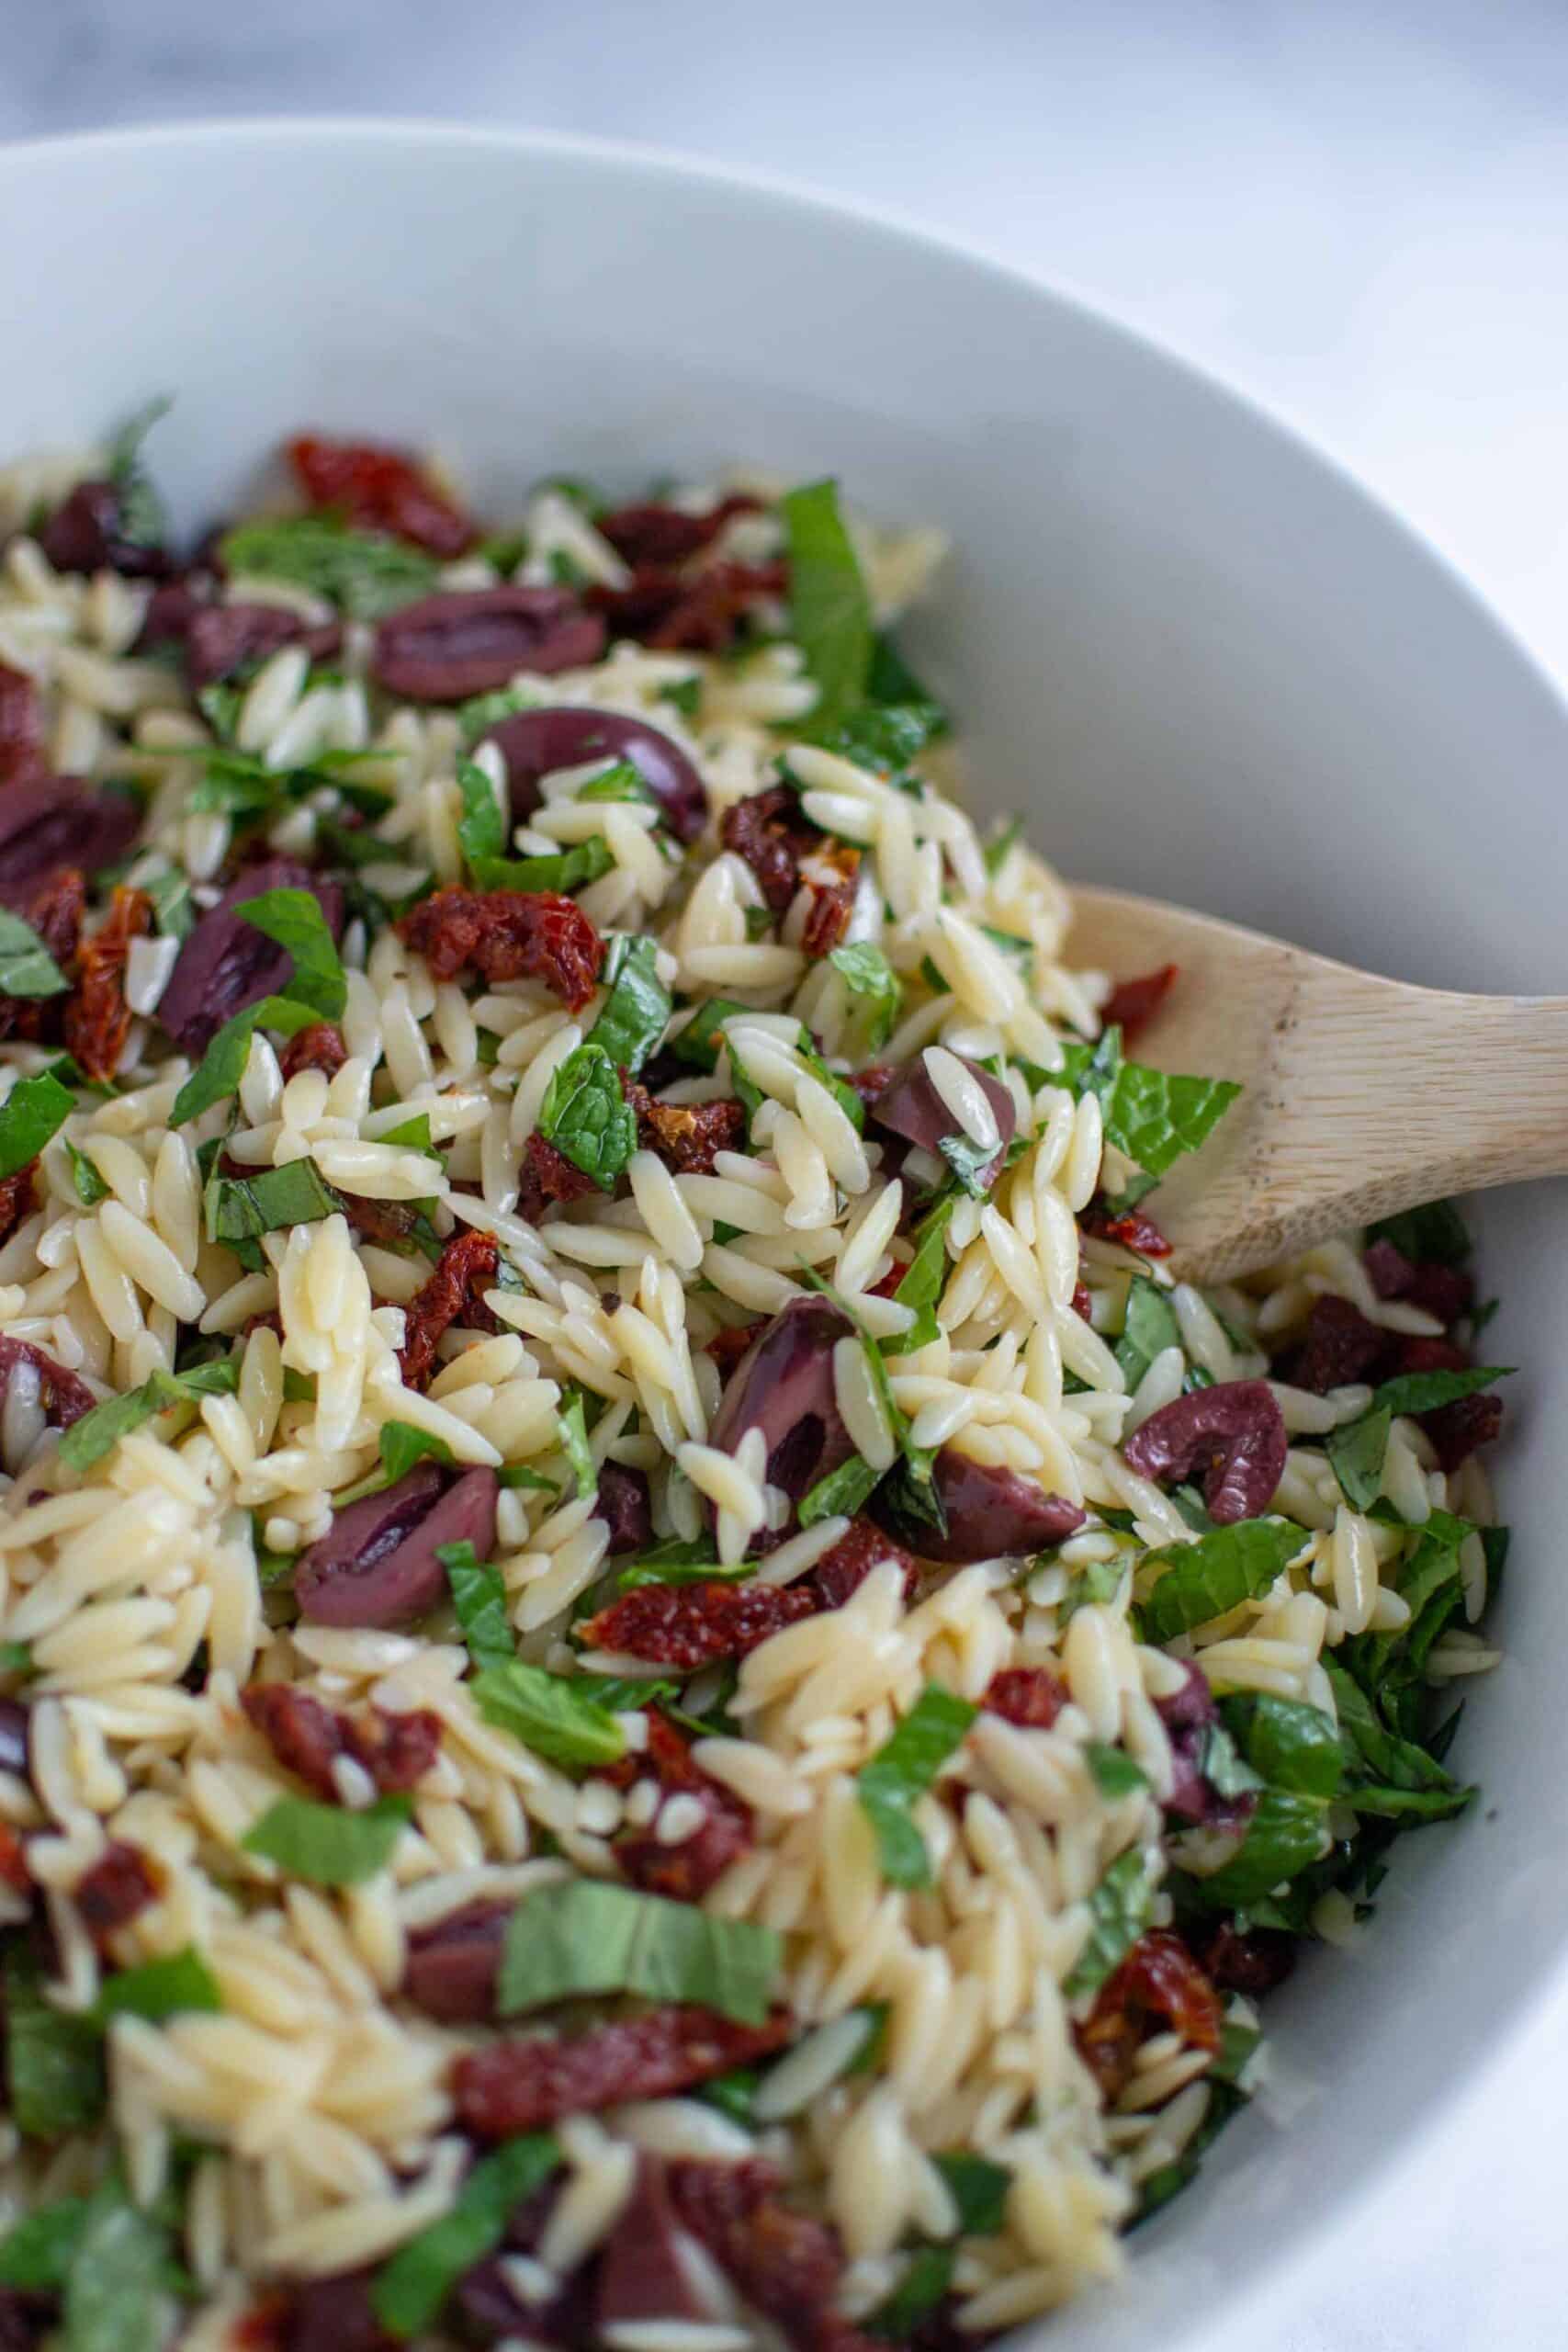 Orzo salad in a large white bowl with a wooden spoon